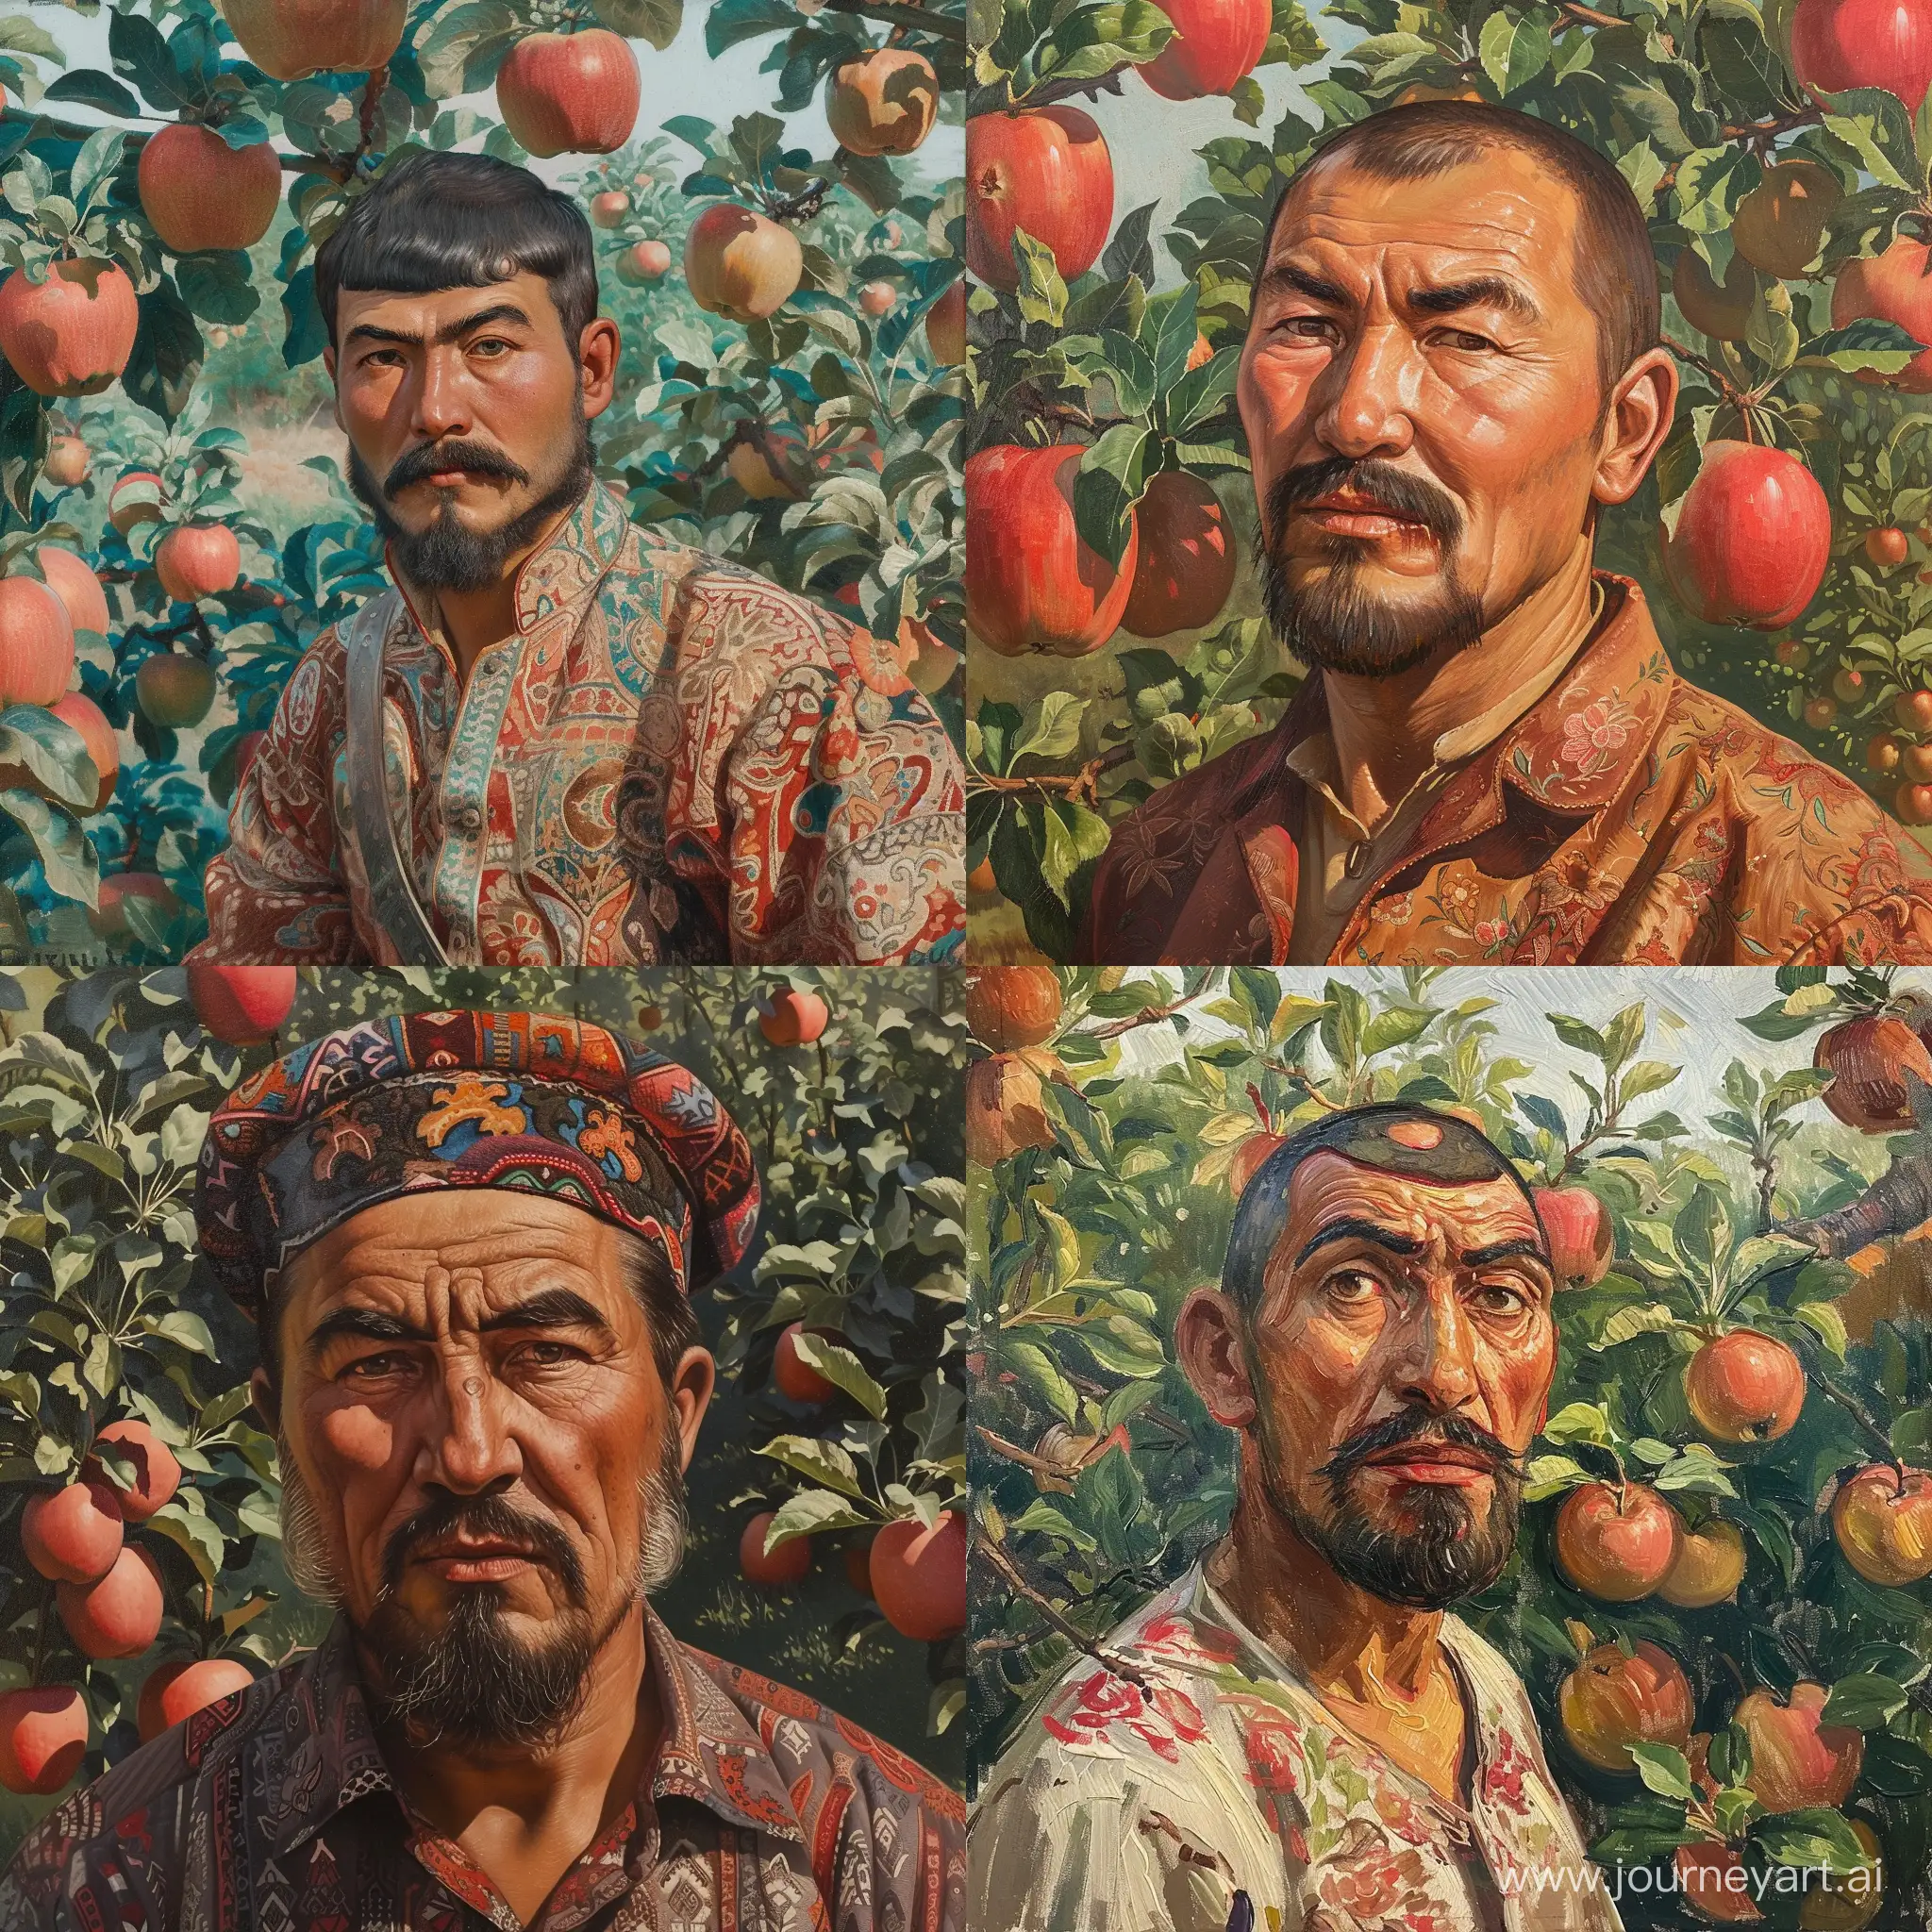 Uzbek-Man-with-Unibrow-in-Vibrant-Apple-Orchard-Setting